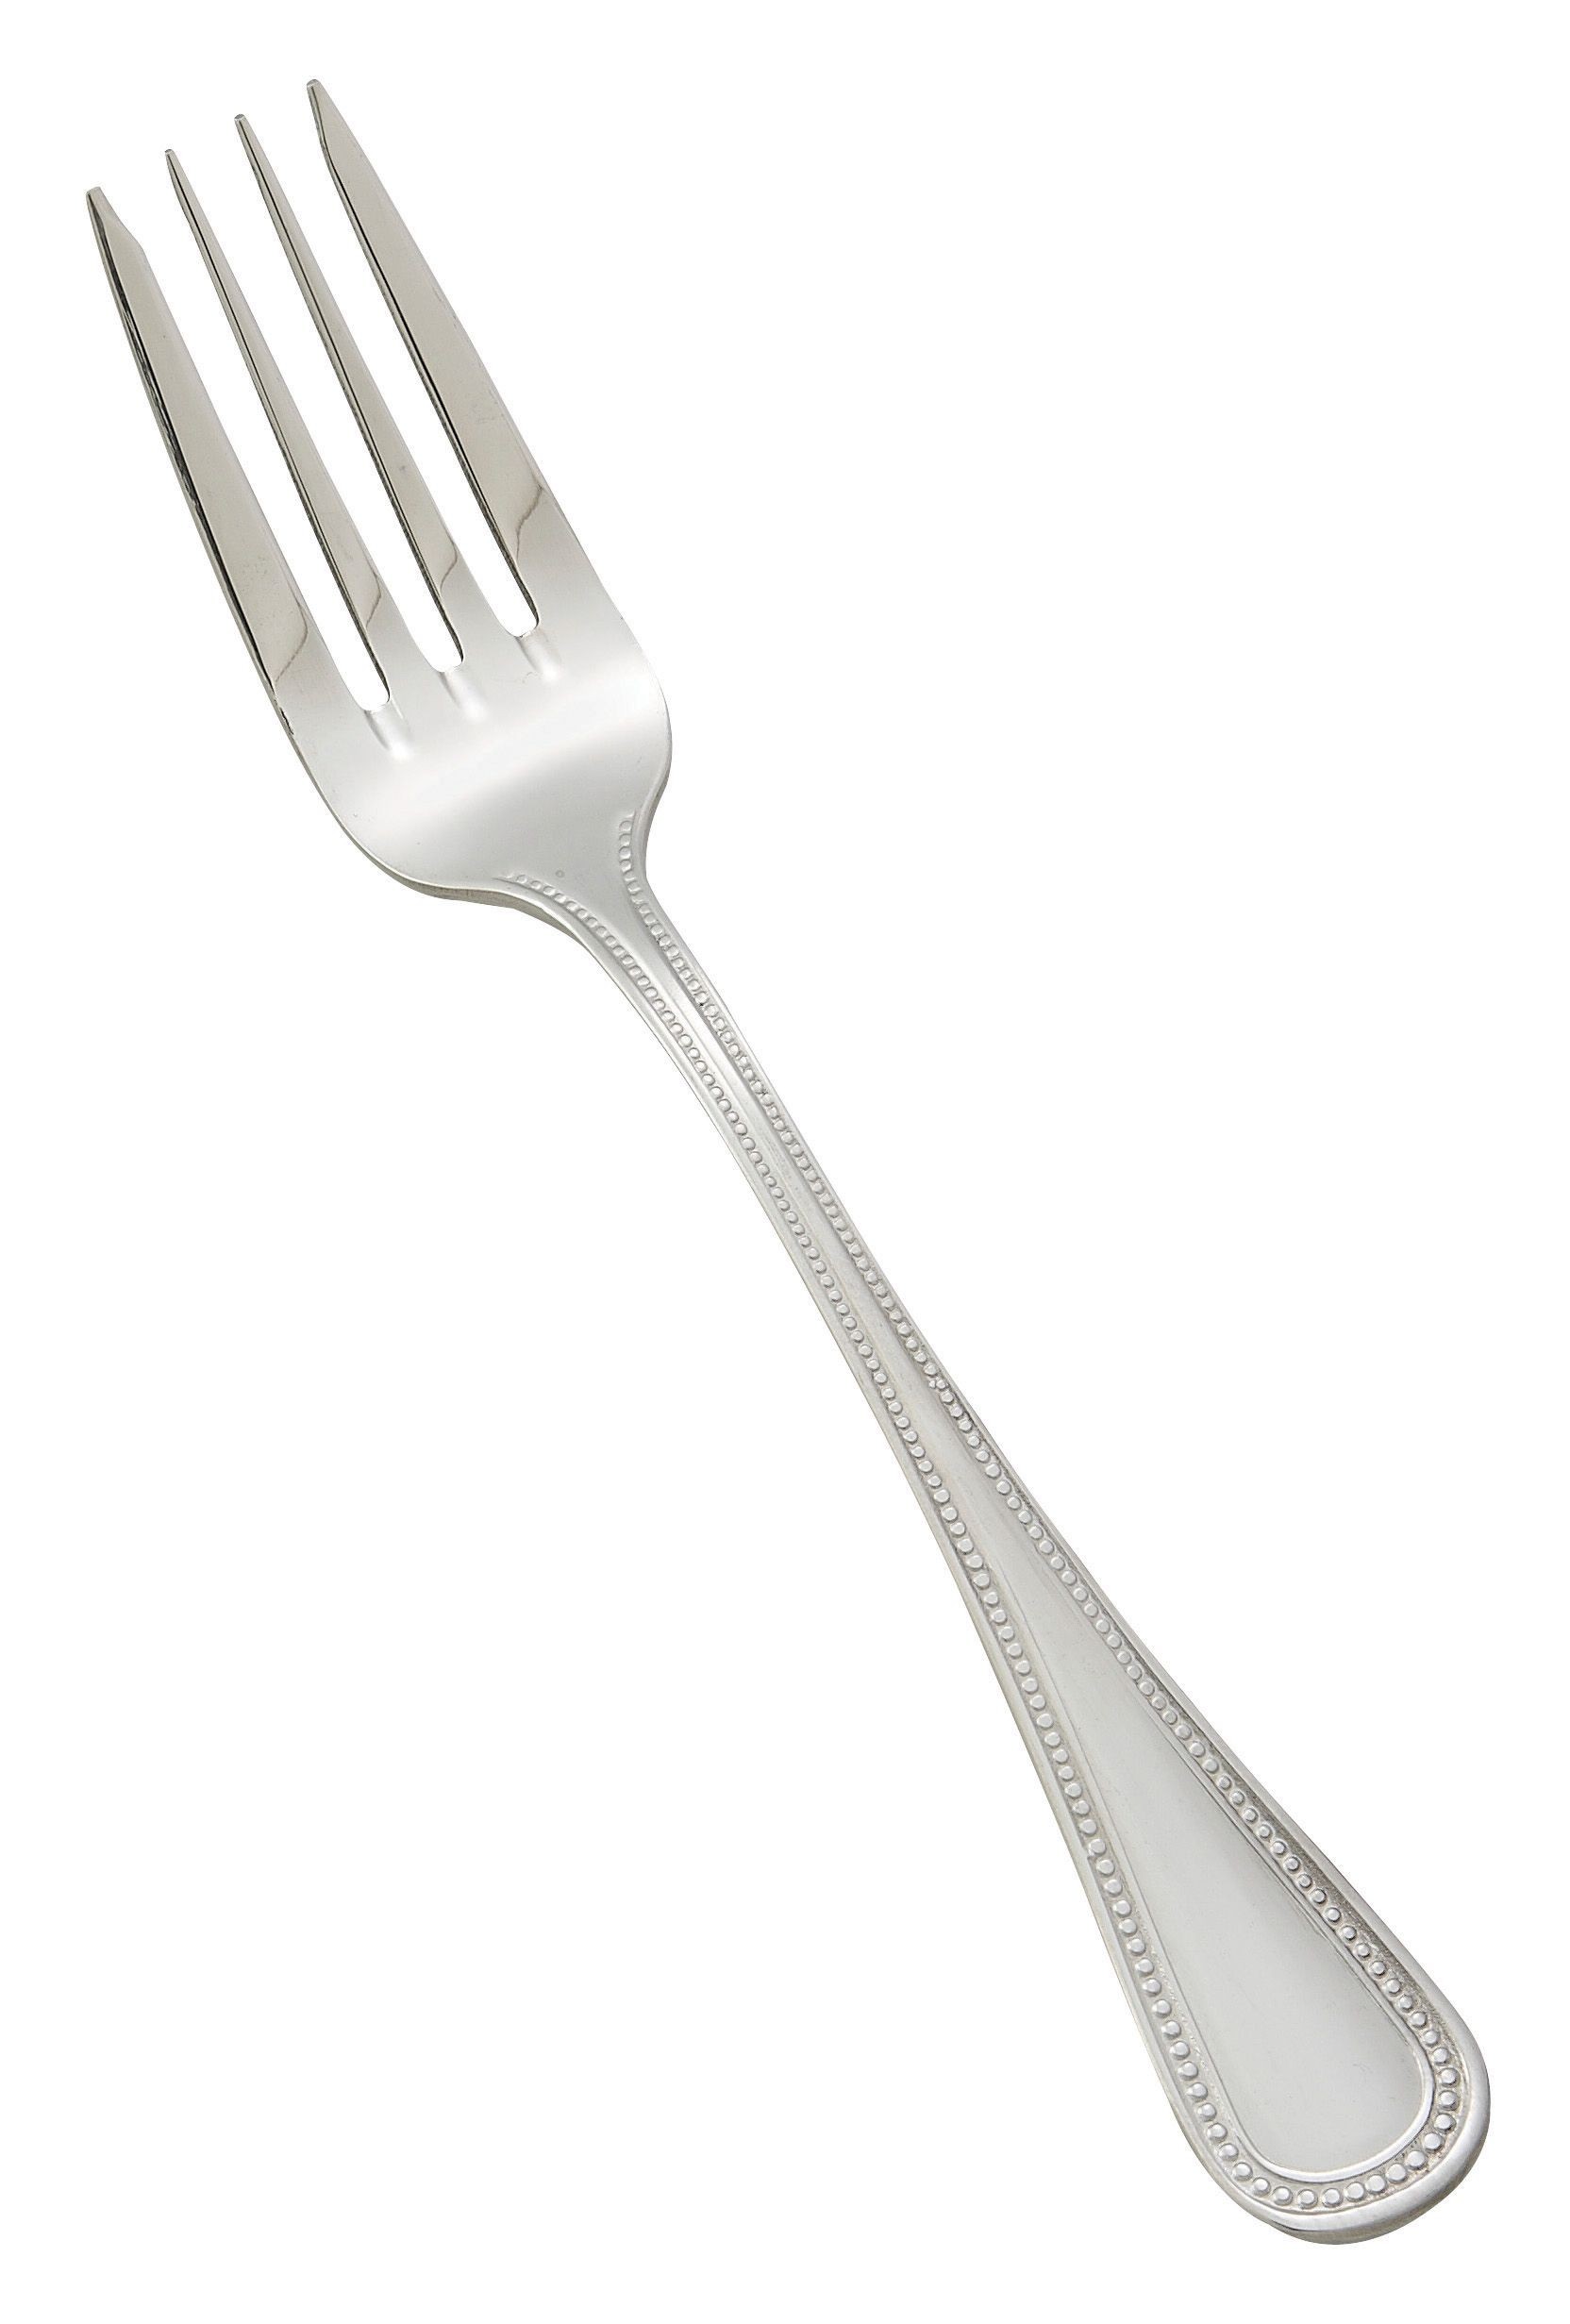 Winco 0036-06 Deluxe Pearl Extra Heavy Stainless Steel Salad Fork (12/Pack)